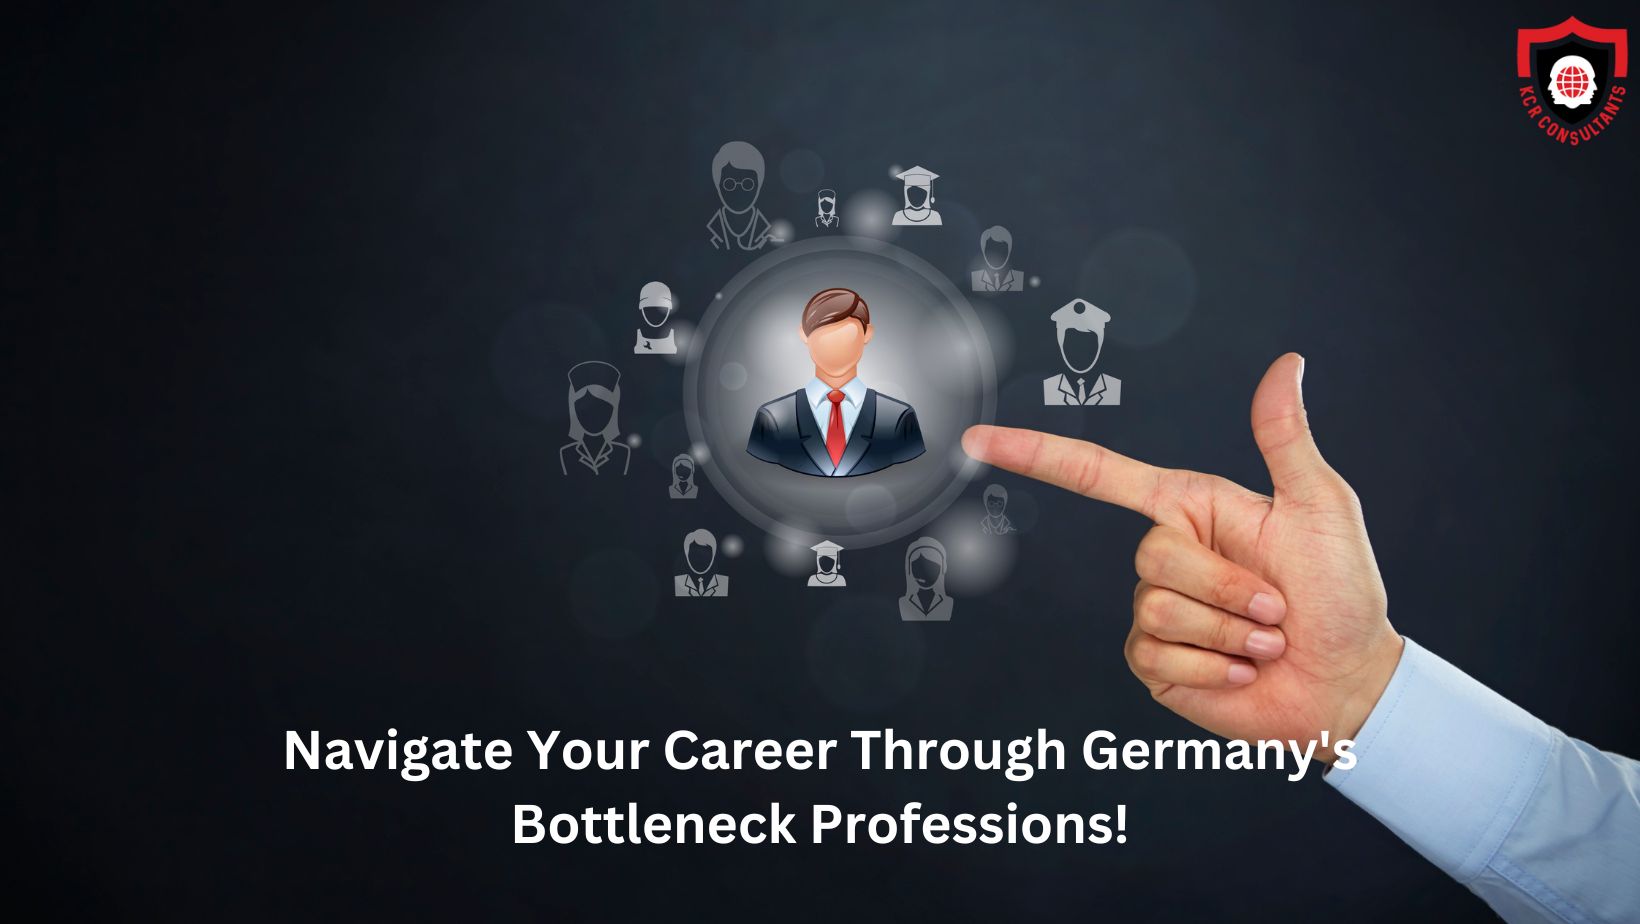 Bottleneck Professions in Germany - KCR CONSULTANTS - Career in Germany